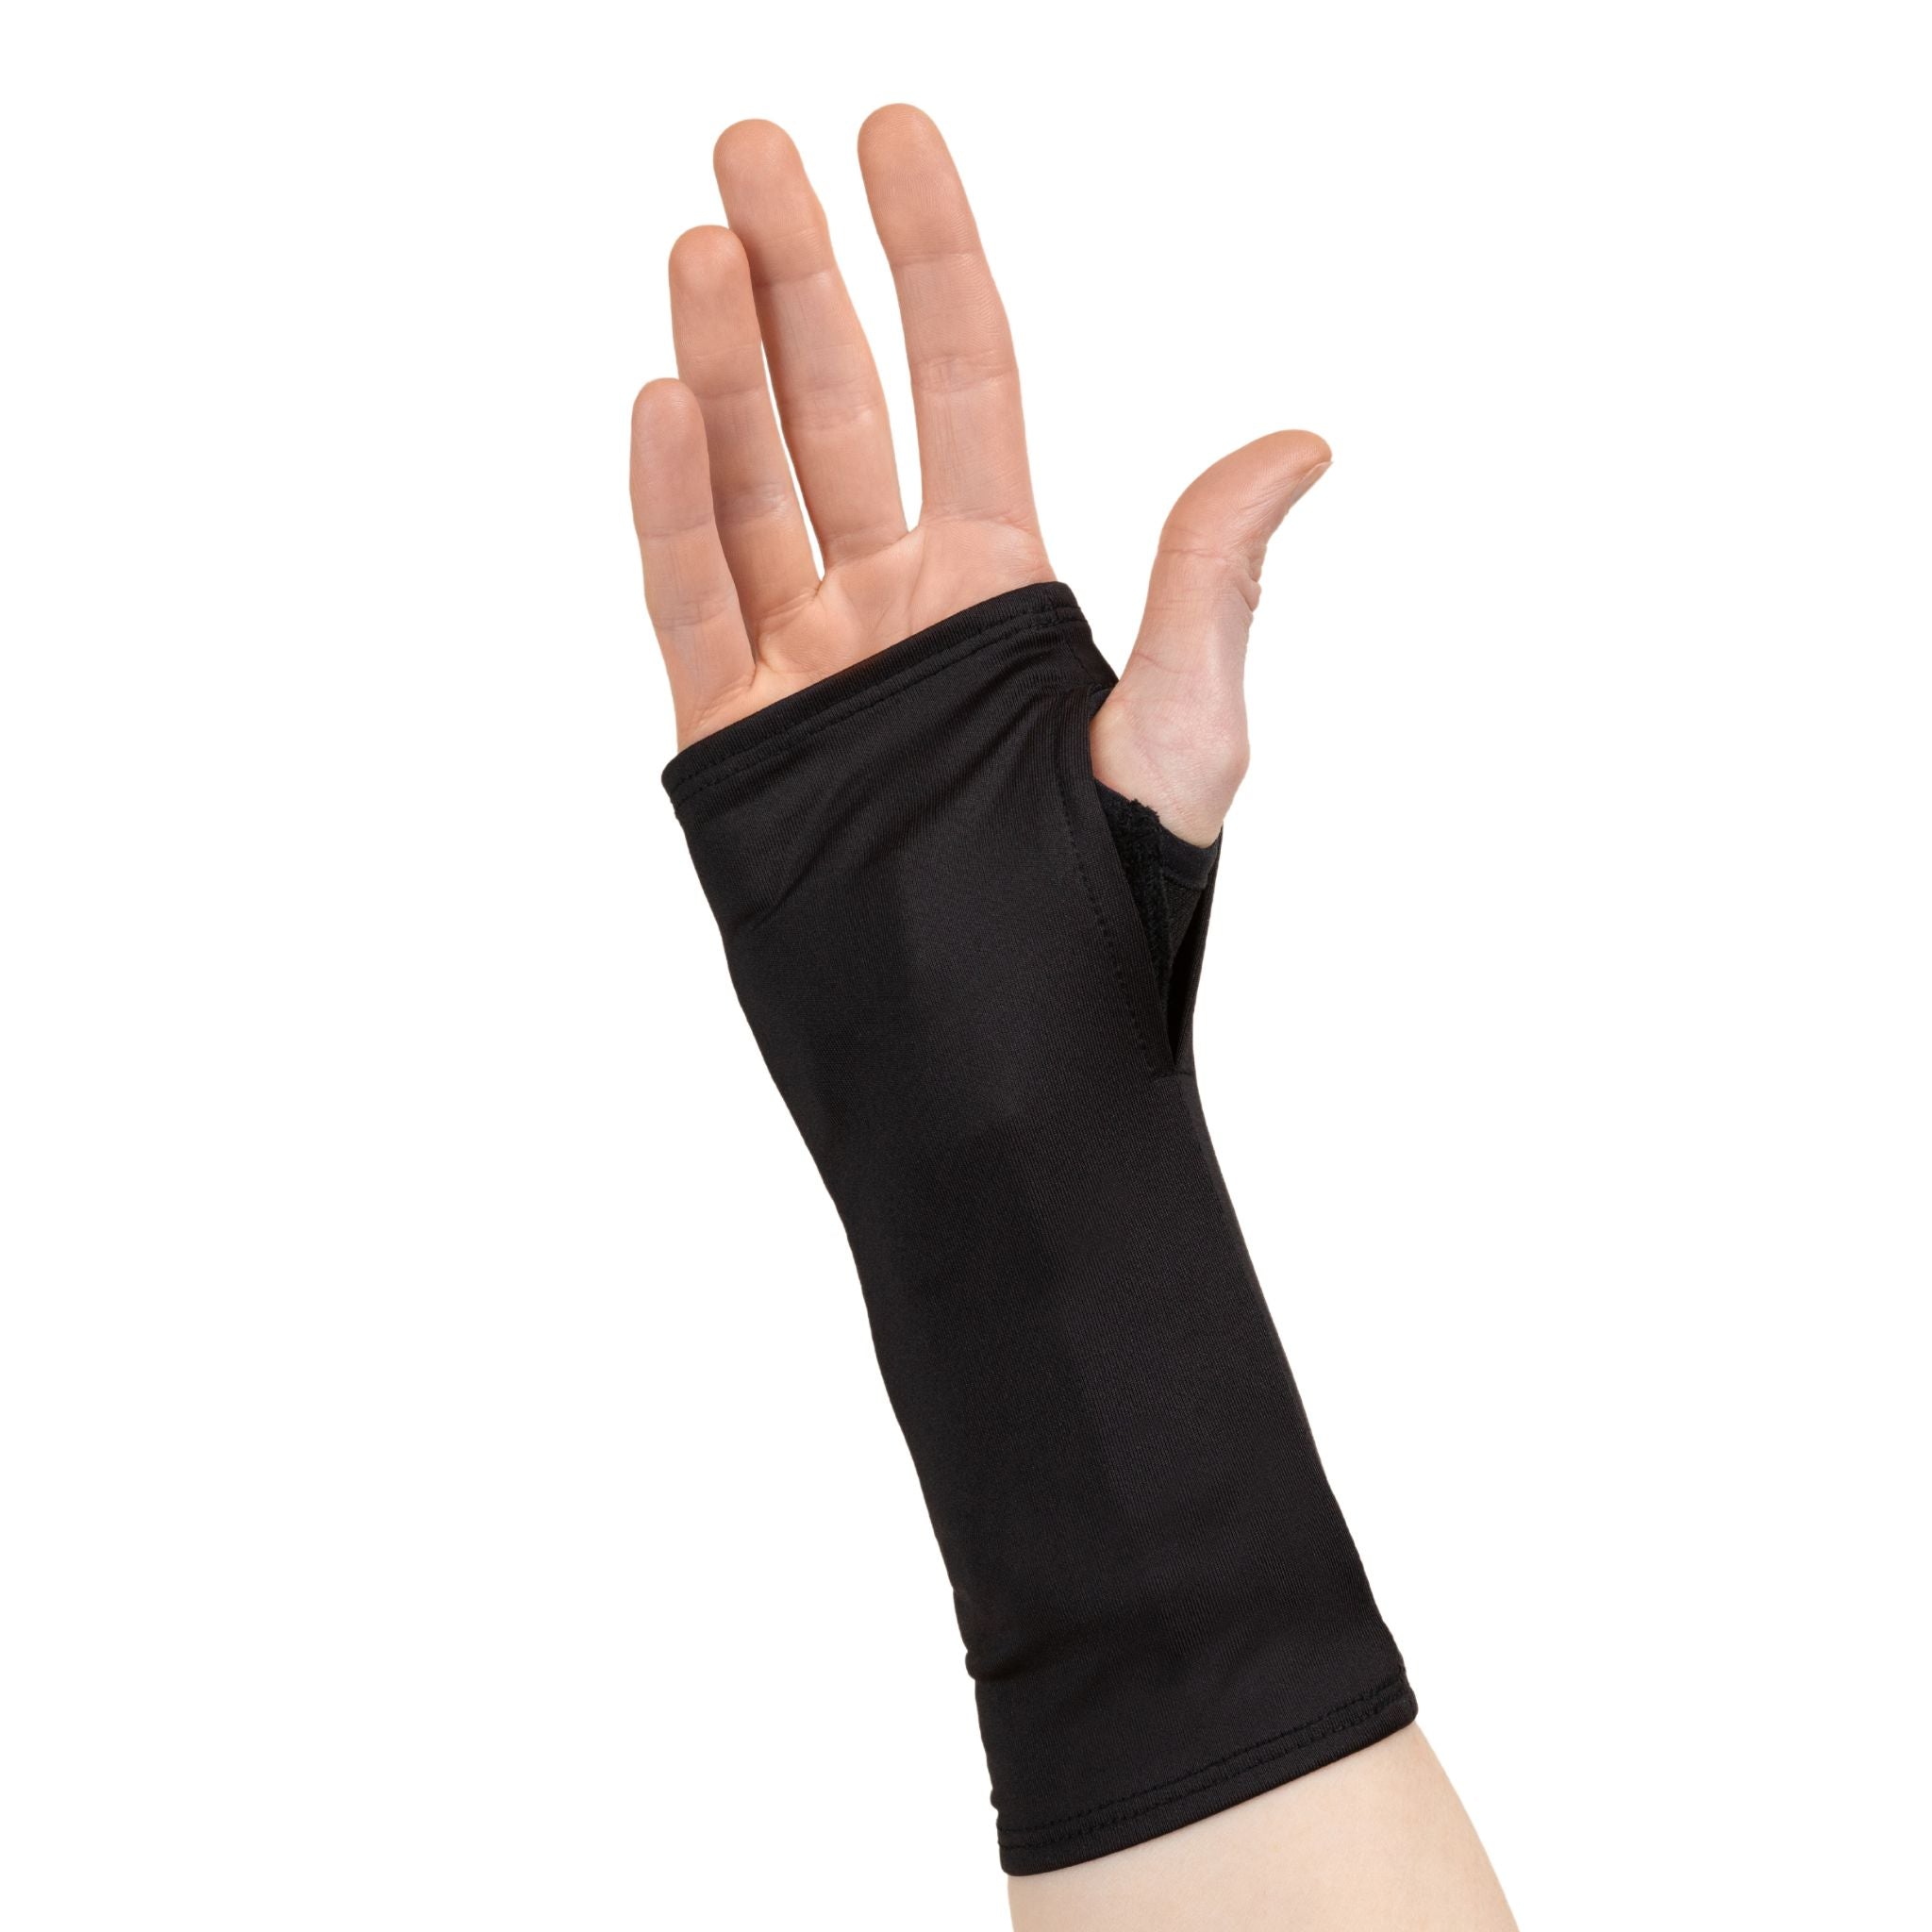 Brace Covers: Protect Your Wrist Brace In Style